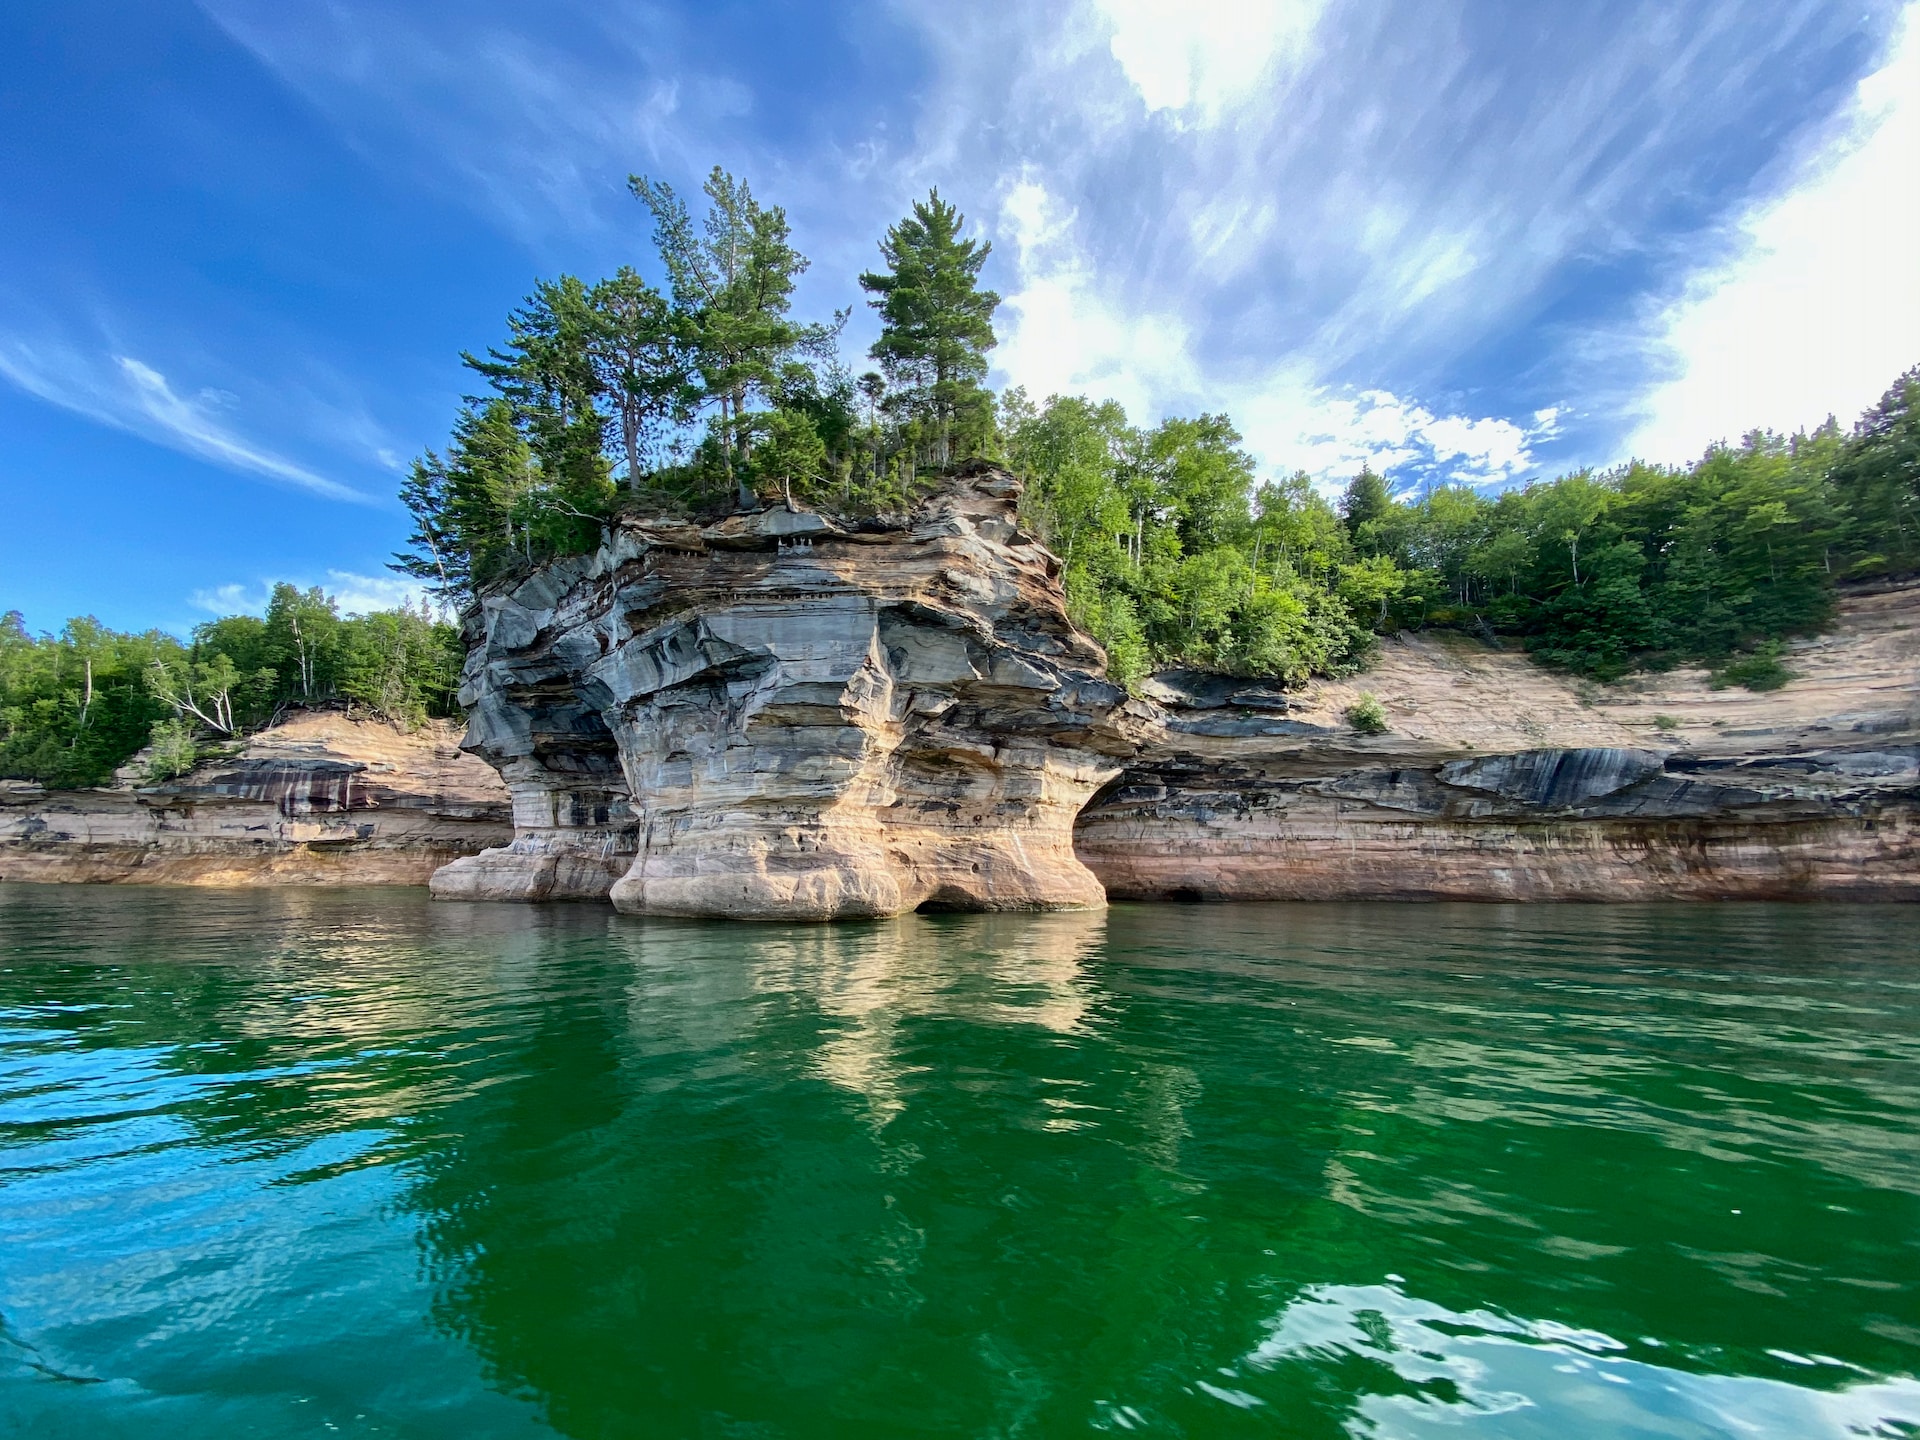 A picturesque blue sky afternoon along Pictured Rocks National Lakeshore on Lake Superior in Michigan’s Upper Peninsula.